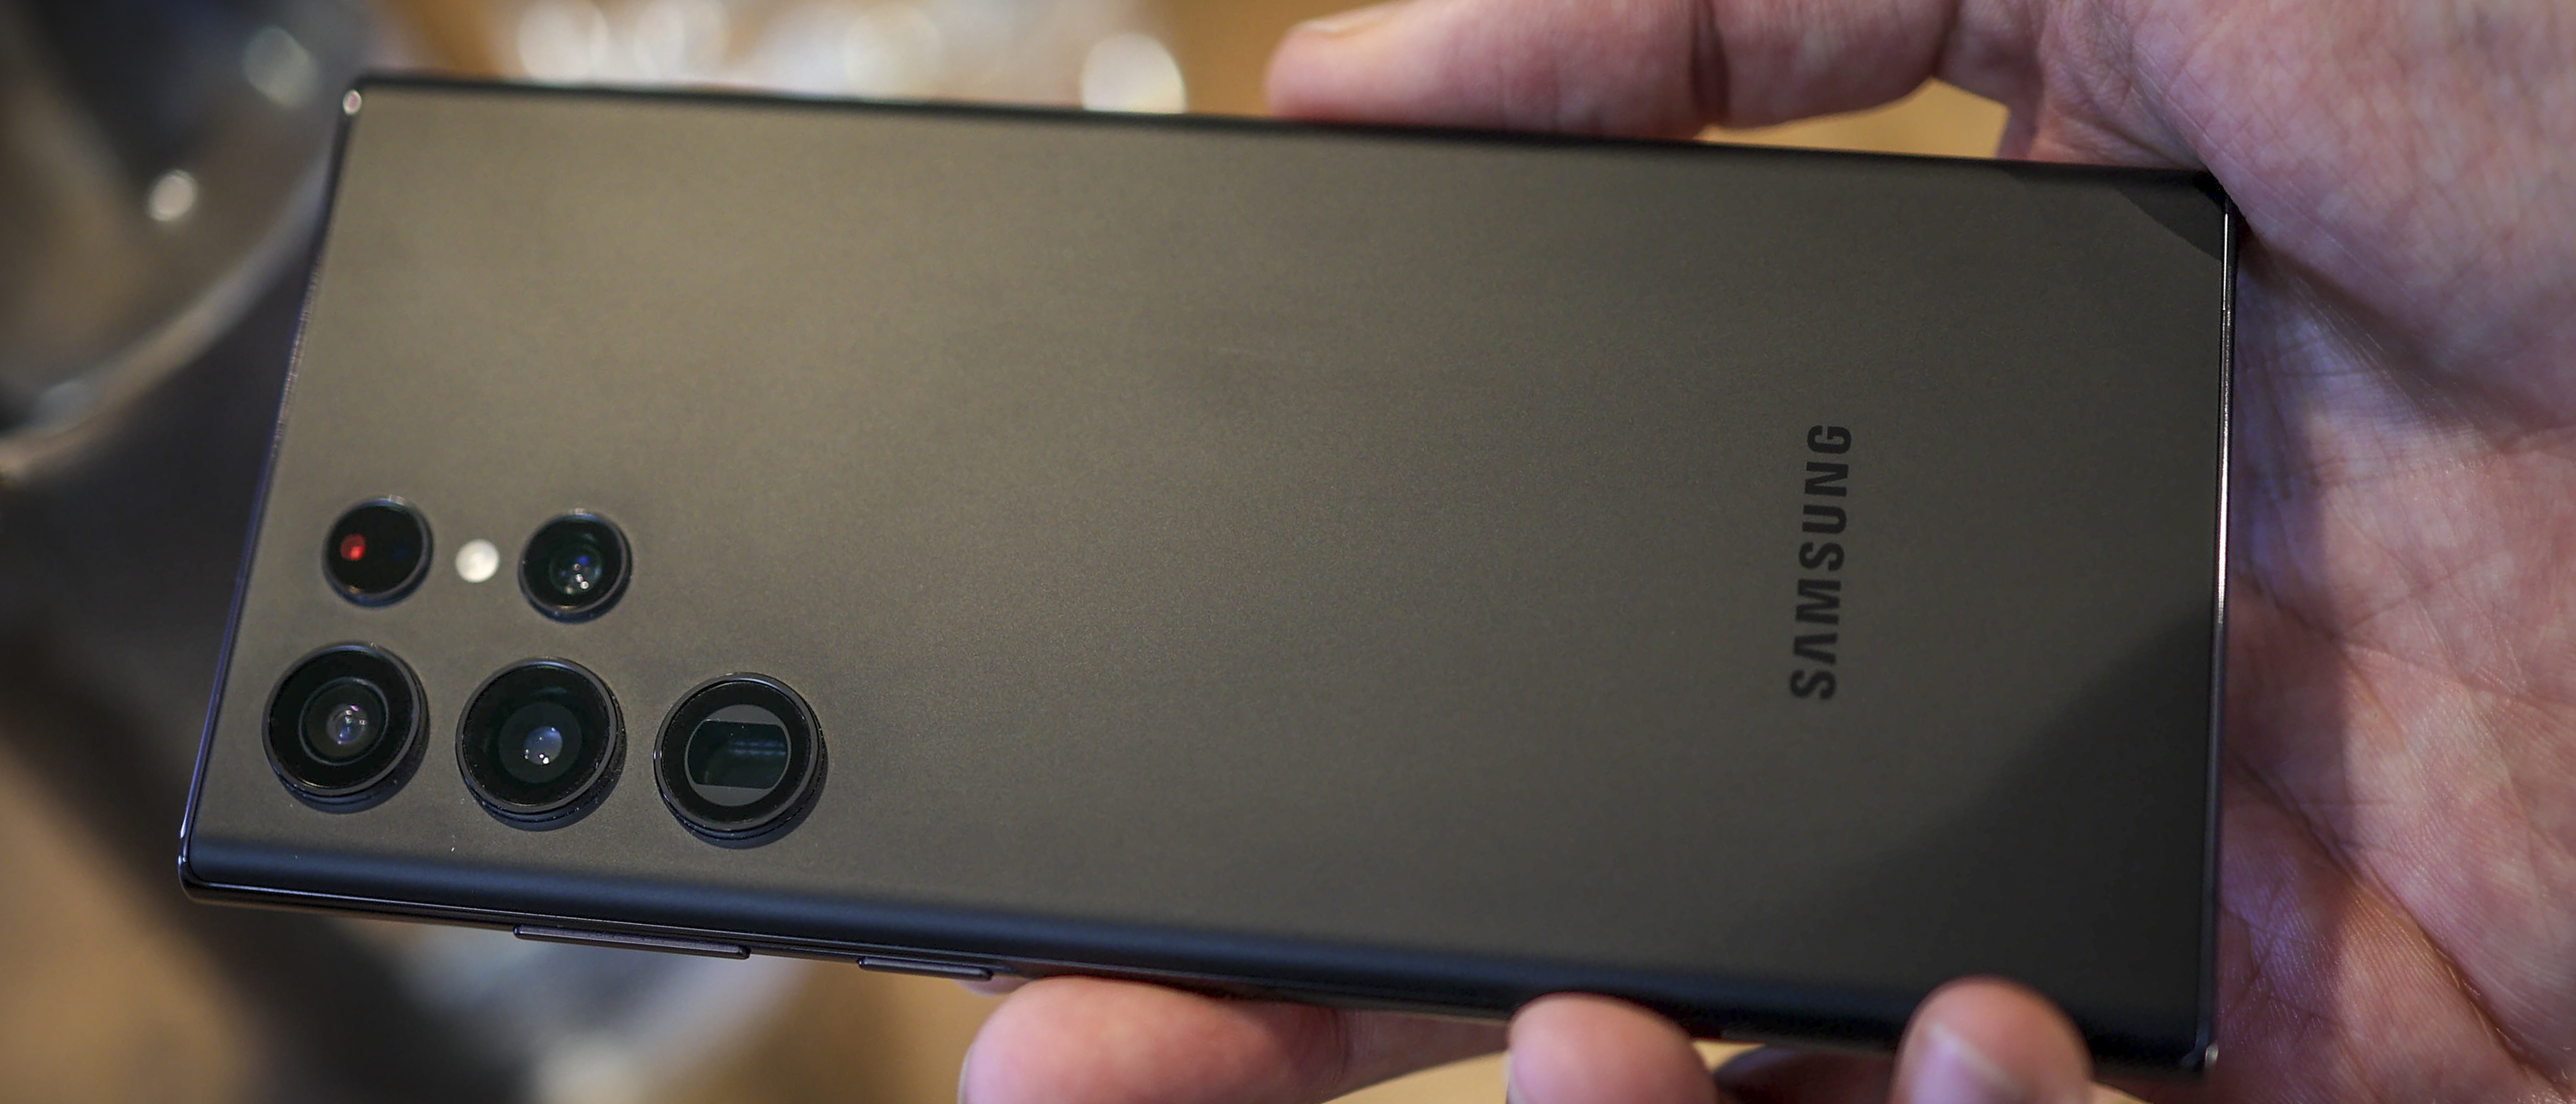 Samsung Galaxy S22 Ultra review: Come for the cameras, stay for the S Pen